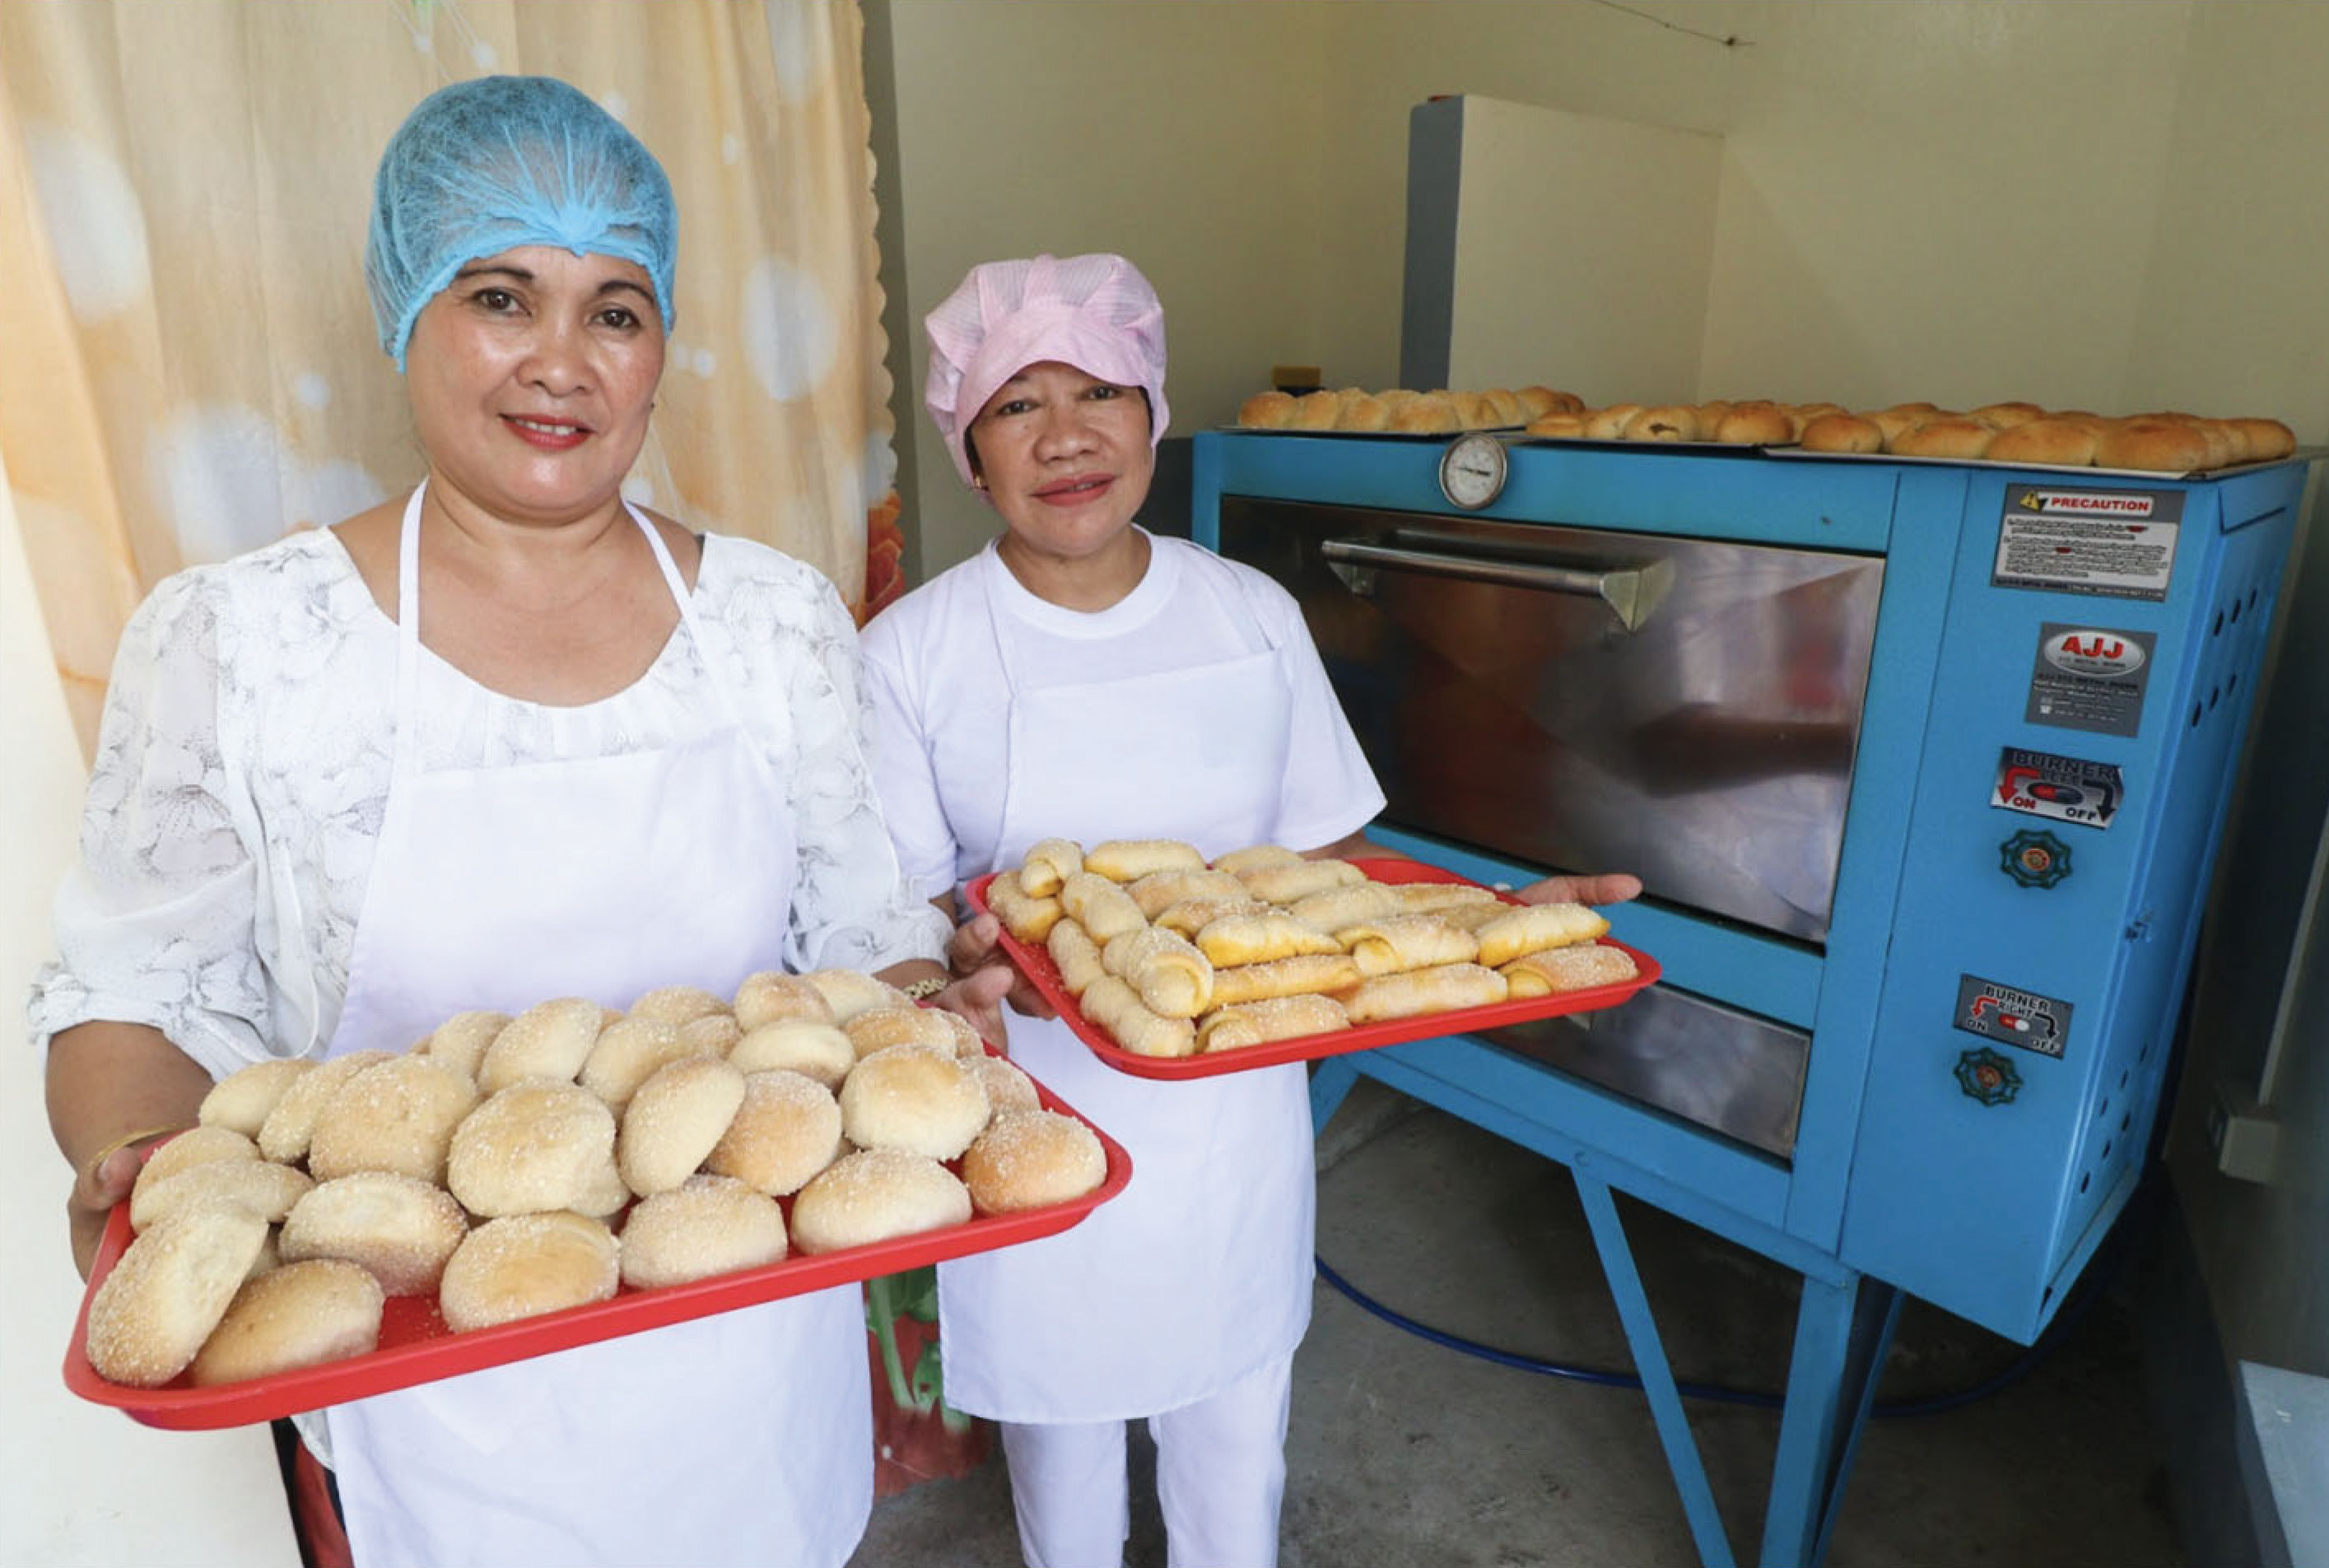  When women 'rise and flourish': Empowering a community through a bakery